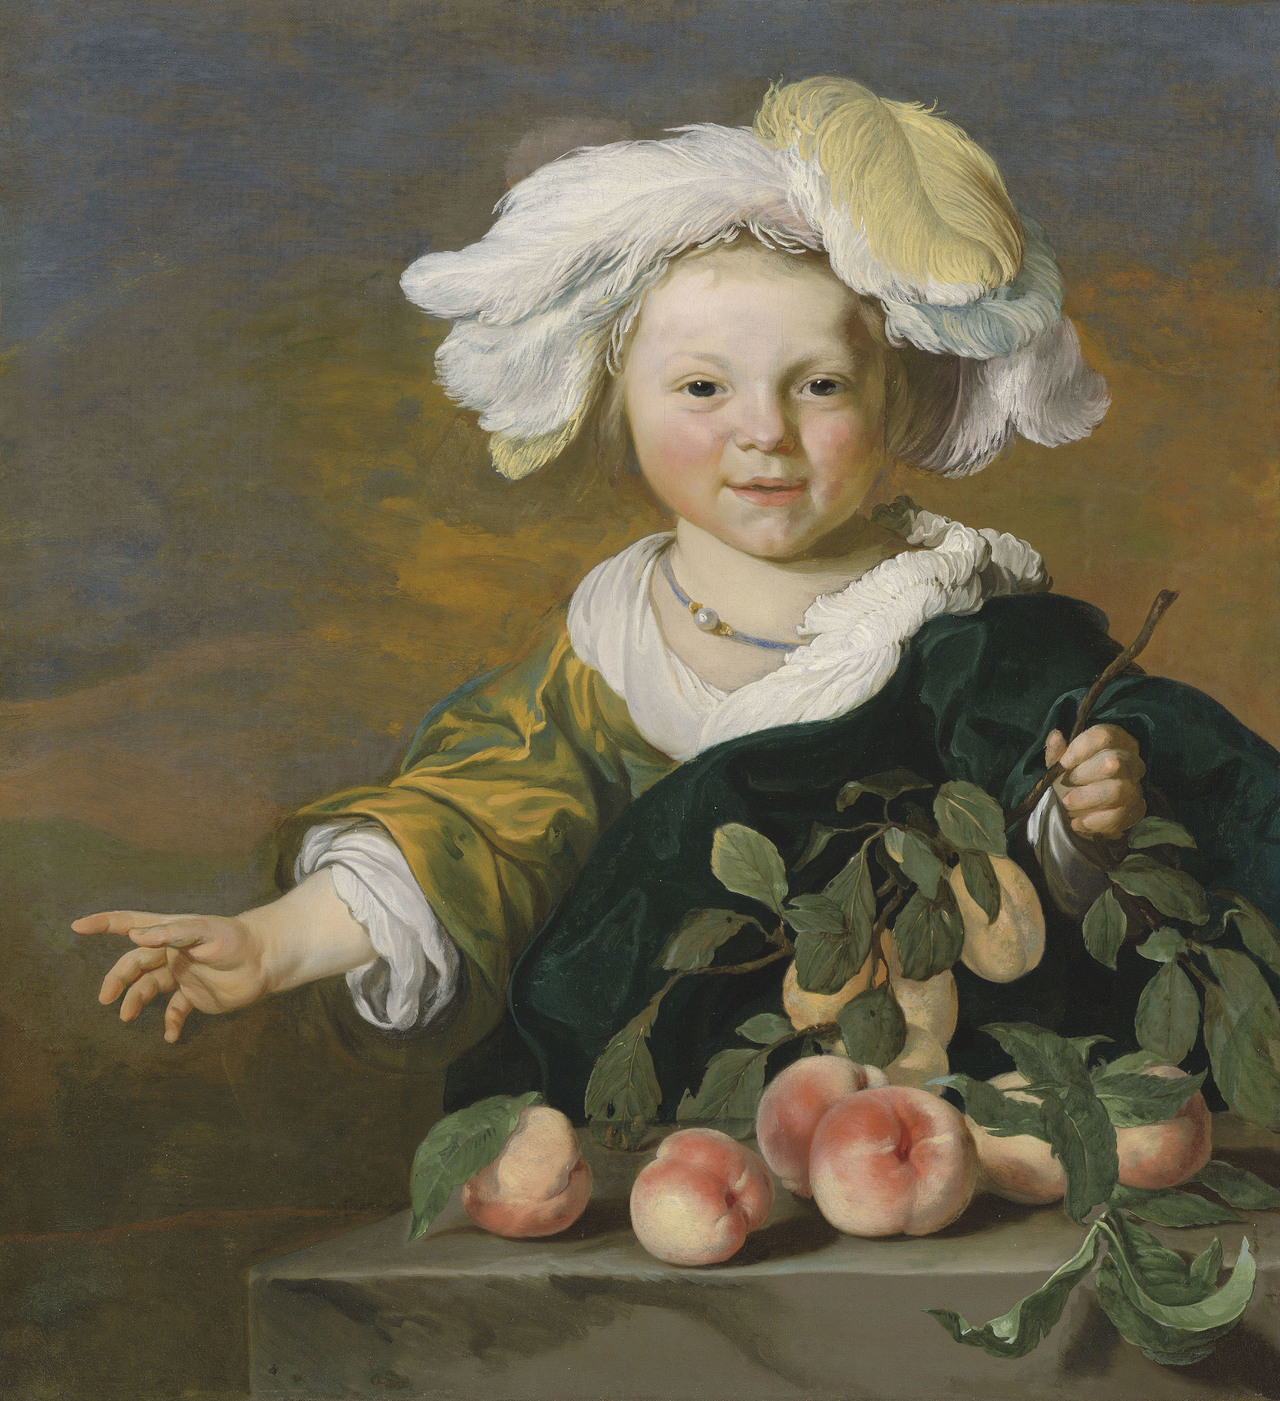 Attributed to Louis Vallee (d.1653), â€˜Portrait of a Child, in a plumed hat with peachesâ€™, 1600s, oil on canvas, Dutch, for sale est. 15,000-20,000 GBP in Christieâ€™s Old Masters Day sale, July 2019